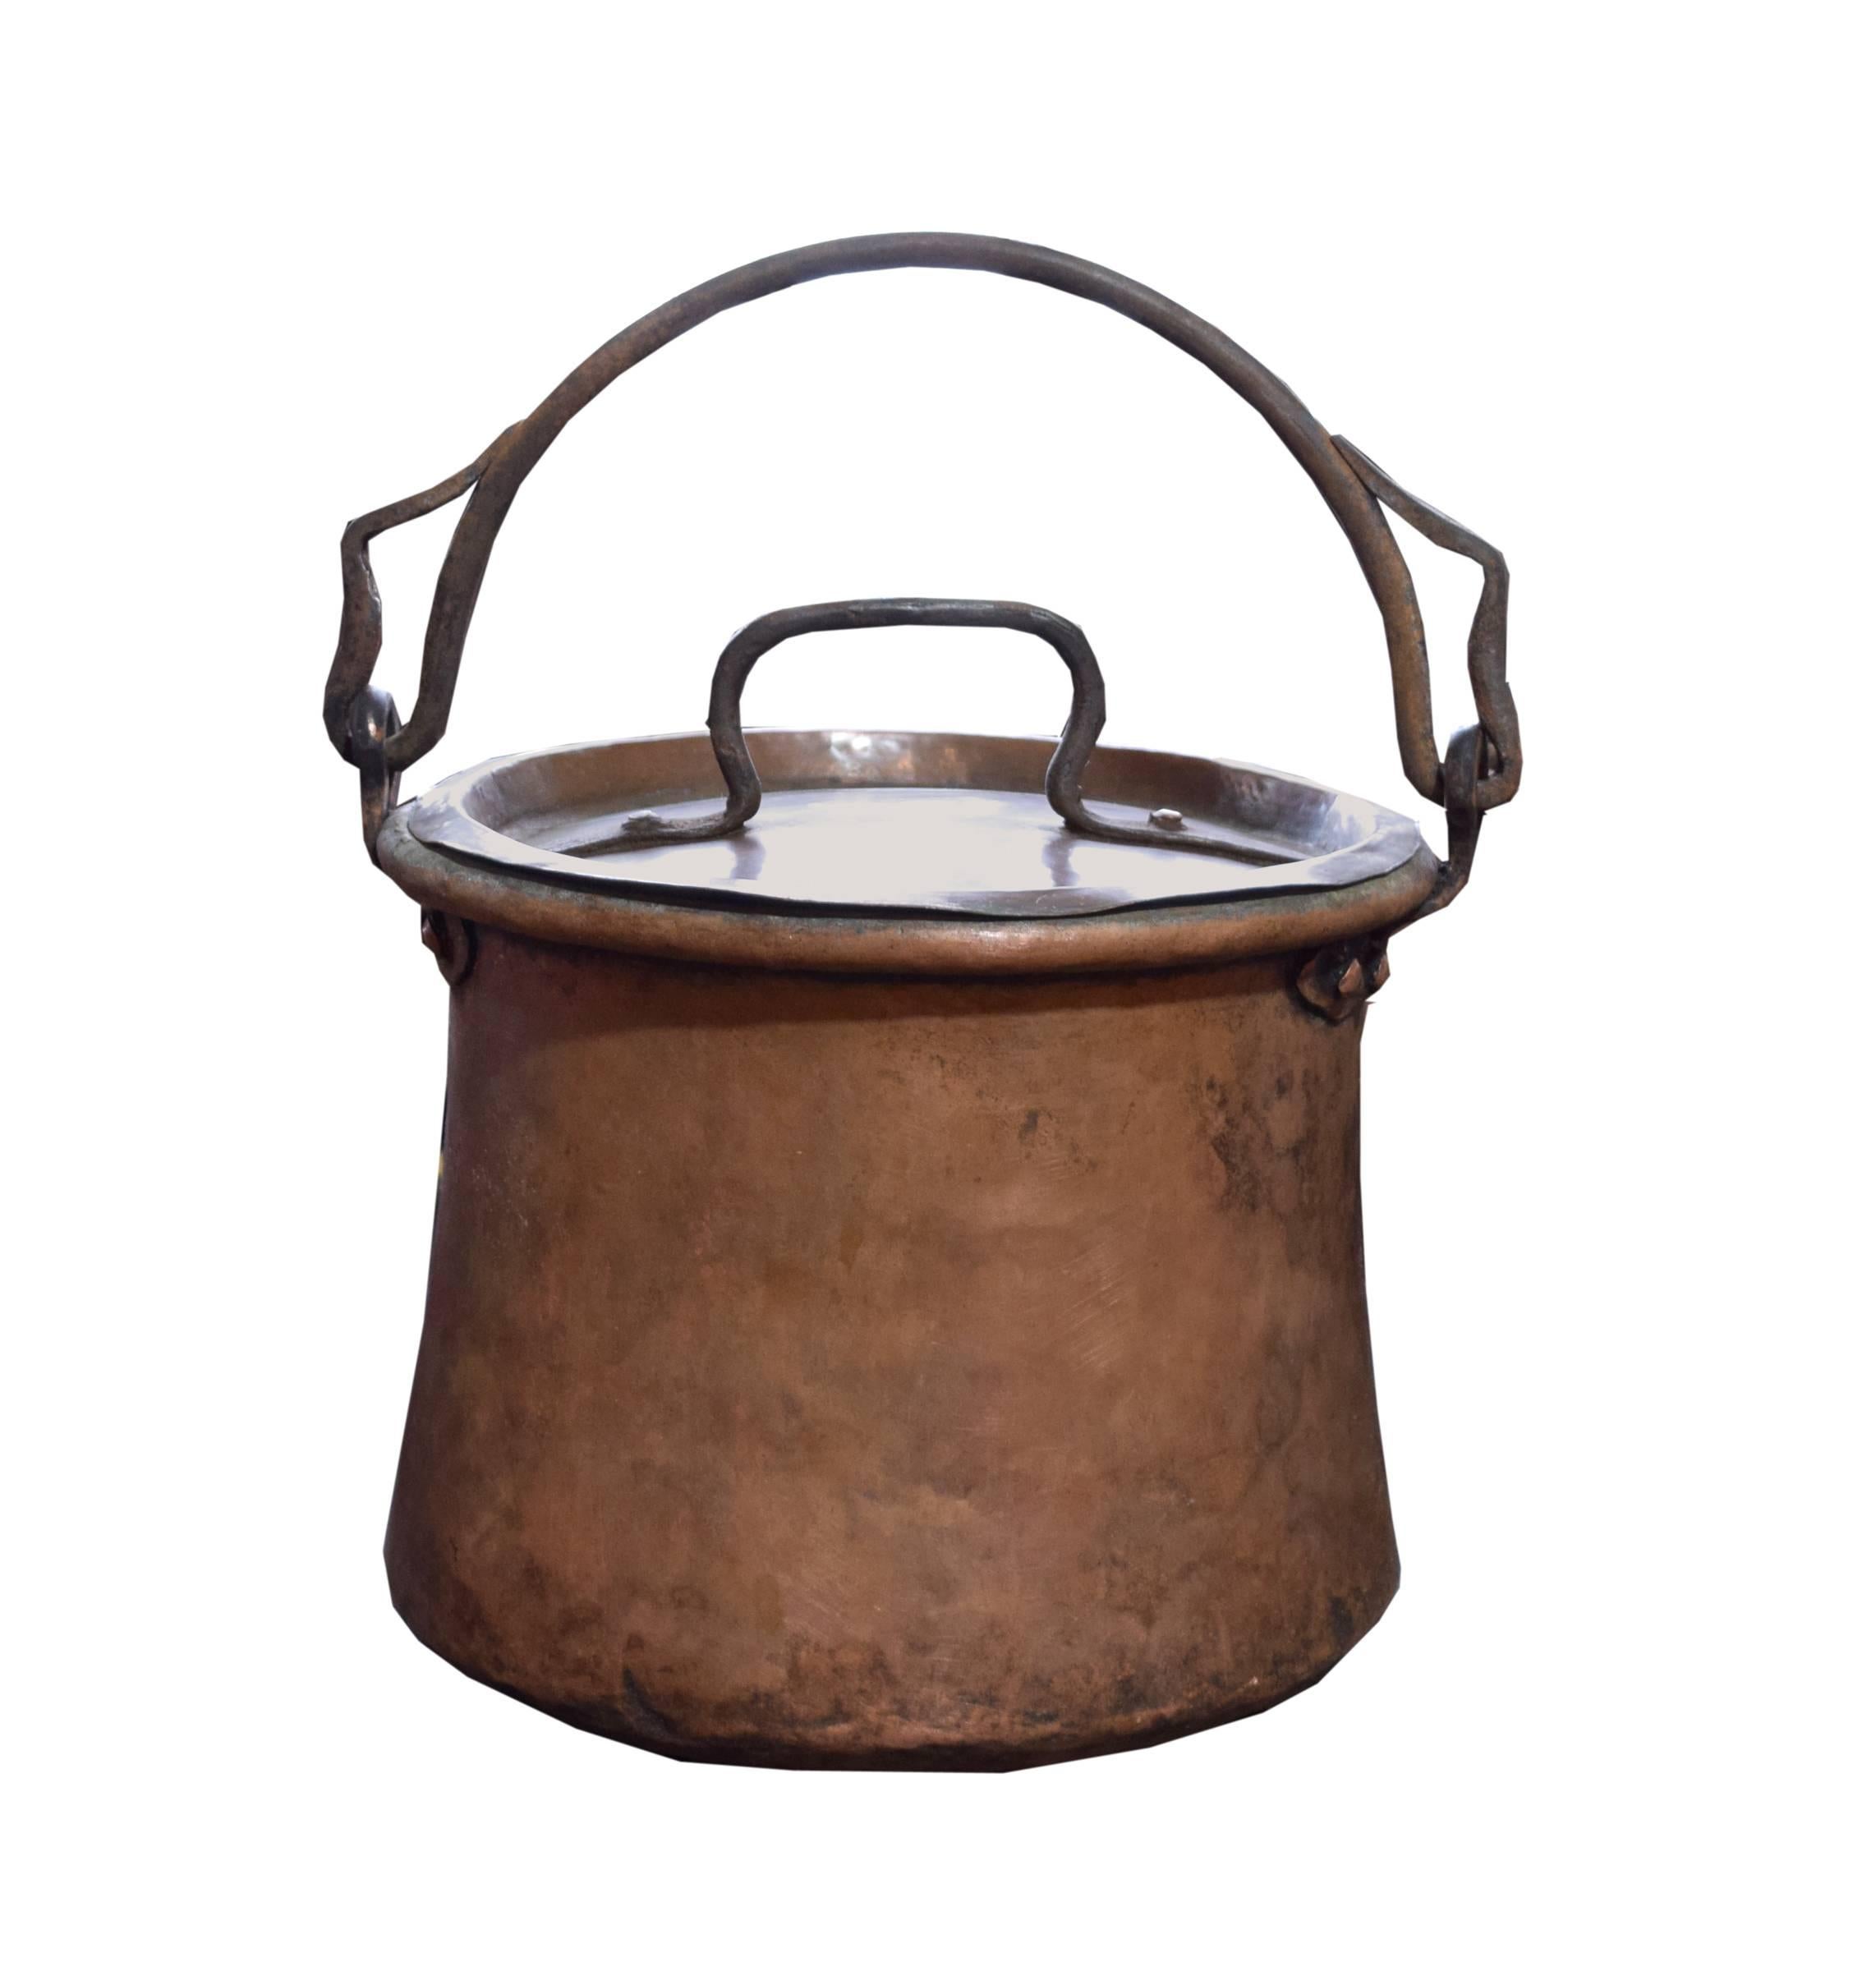 19th century Italian copper cooking vessels in graduated sizes with iron handles.
Priced individually.

Measures: 12